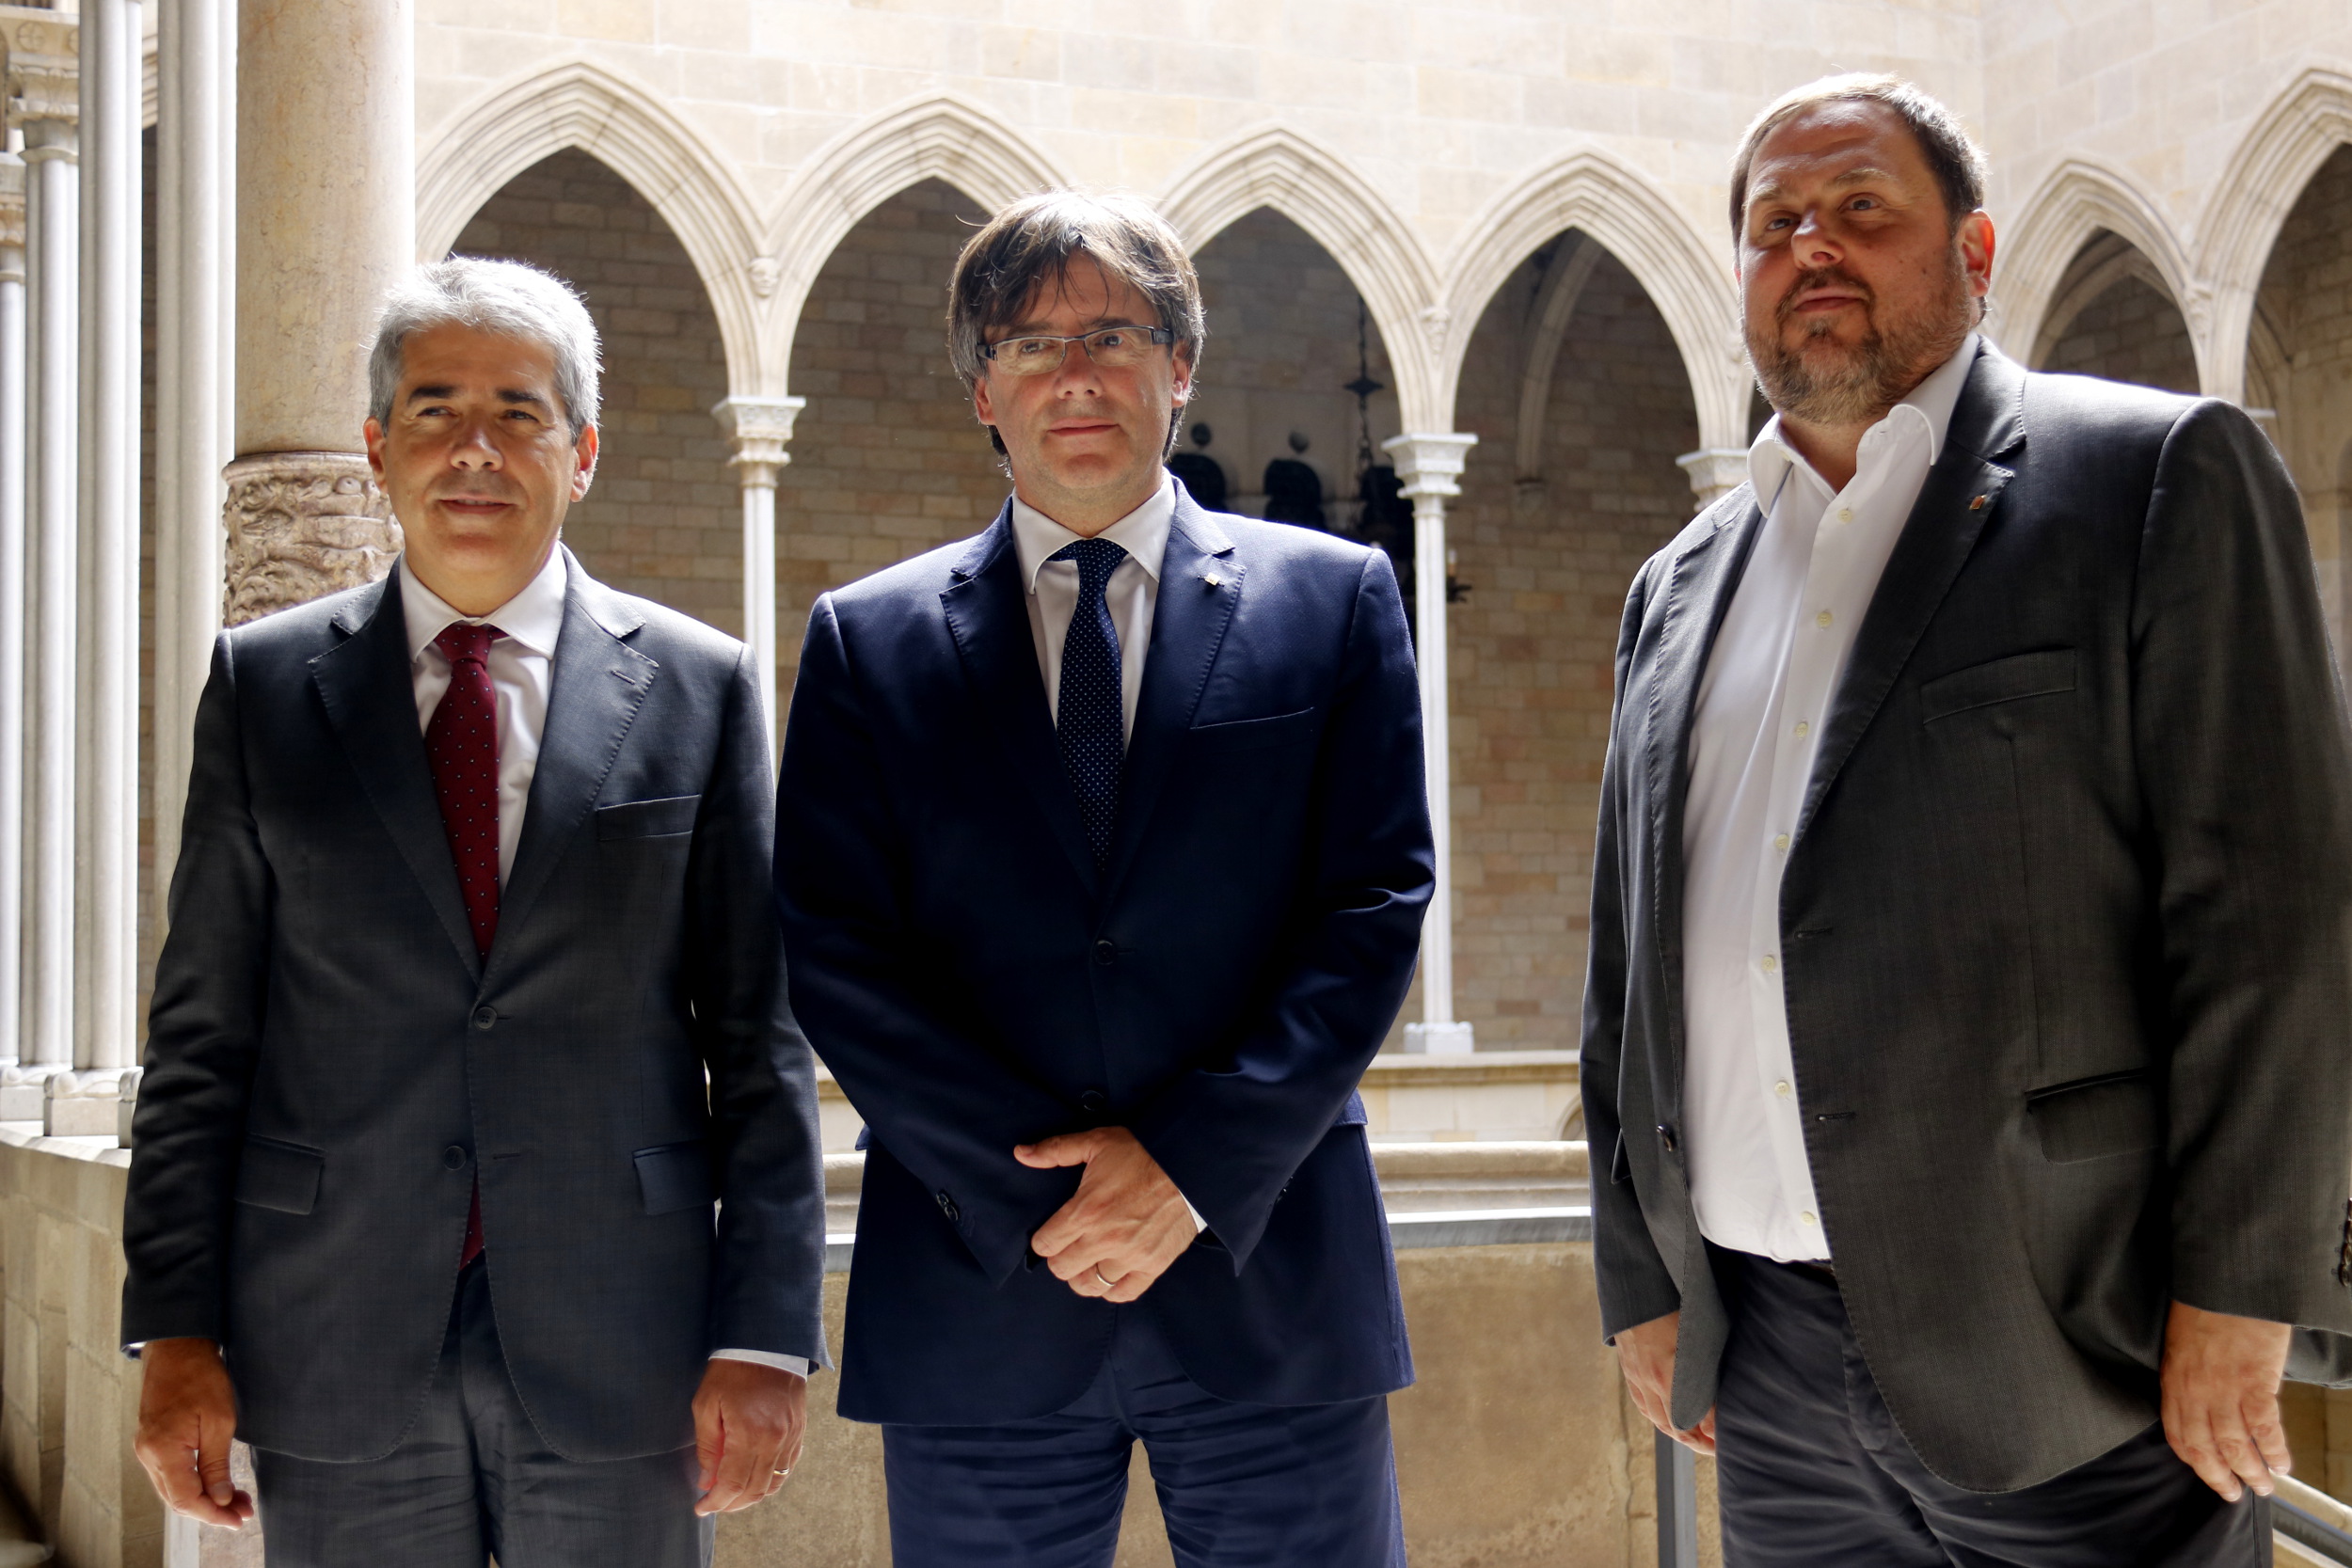 Catalan President, Carles Puigdemont and Catalan Vice President Oriol Junqueras, met with Former Catalan Minister for Presidency, Francesc Homs, ahead of his statement before Madrid's Supreme Court (by ACN)